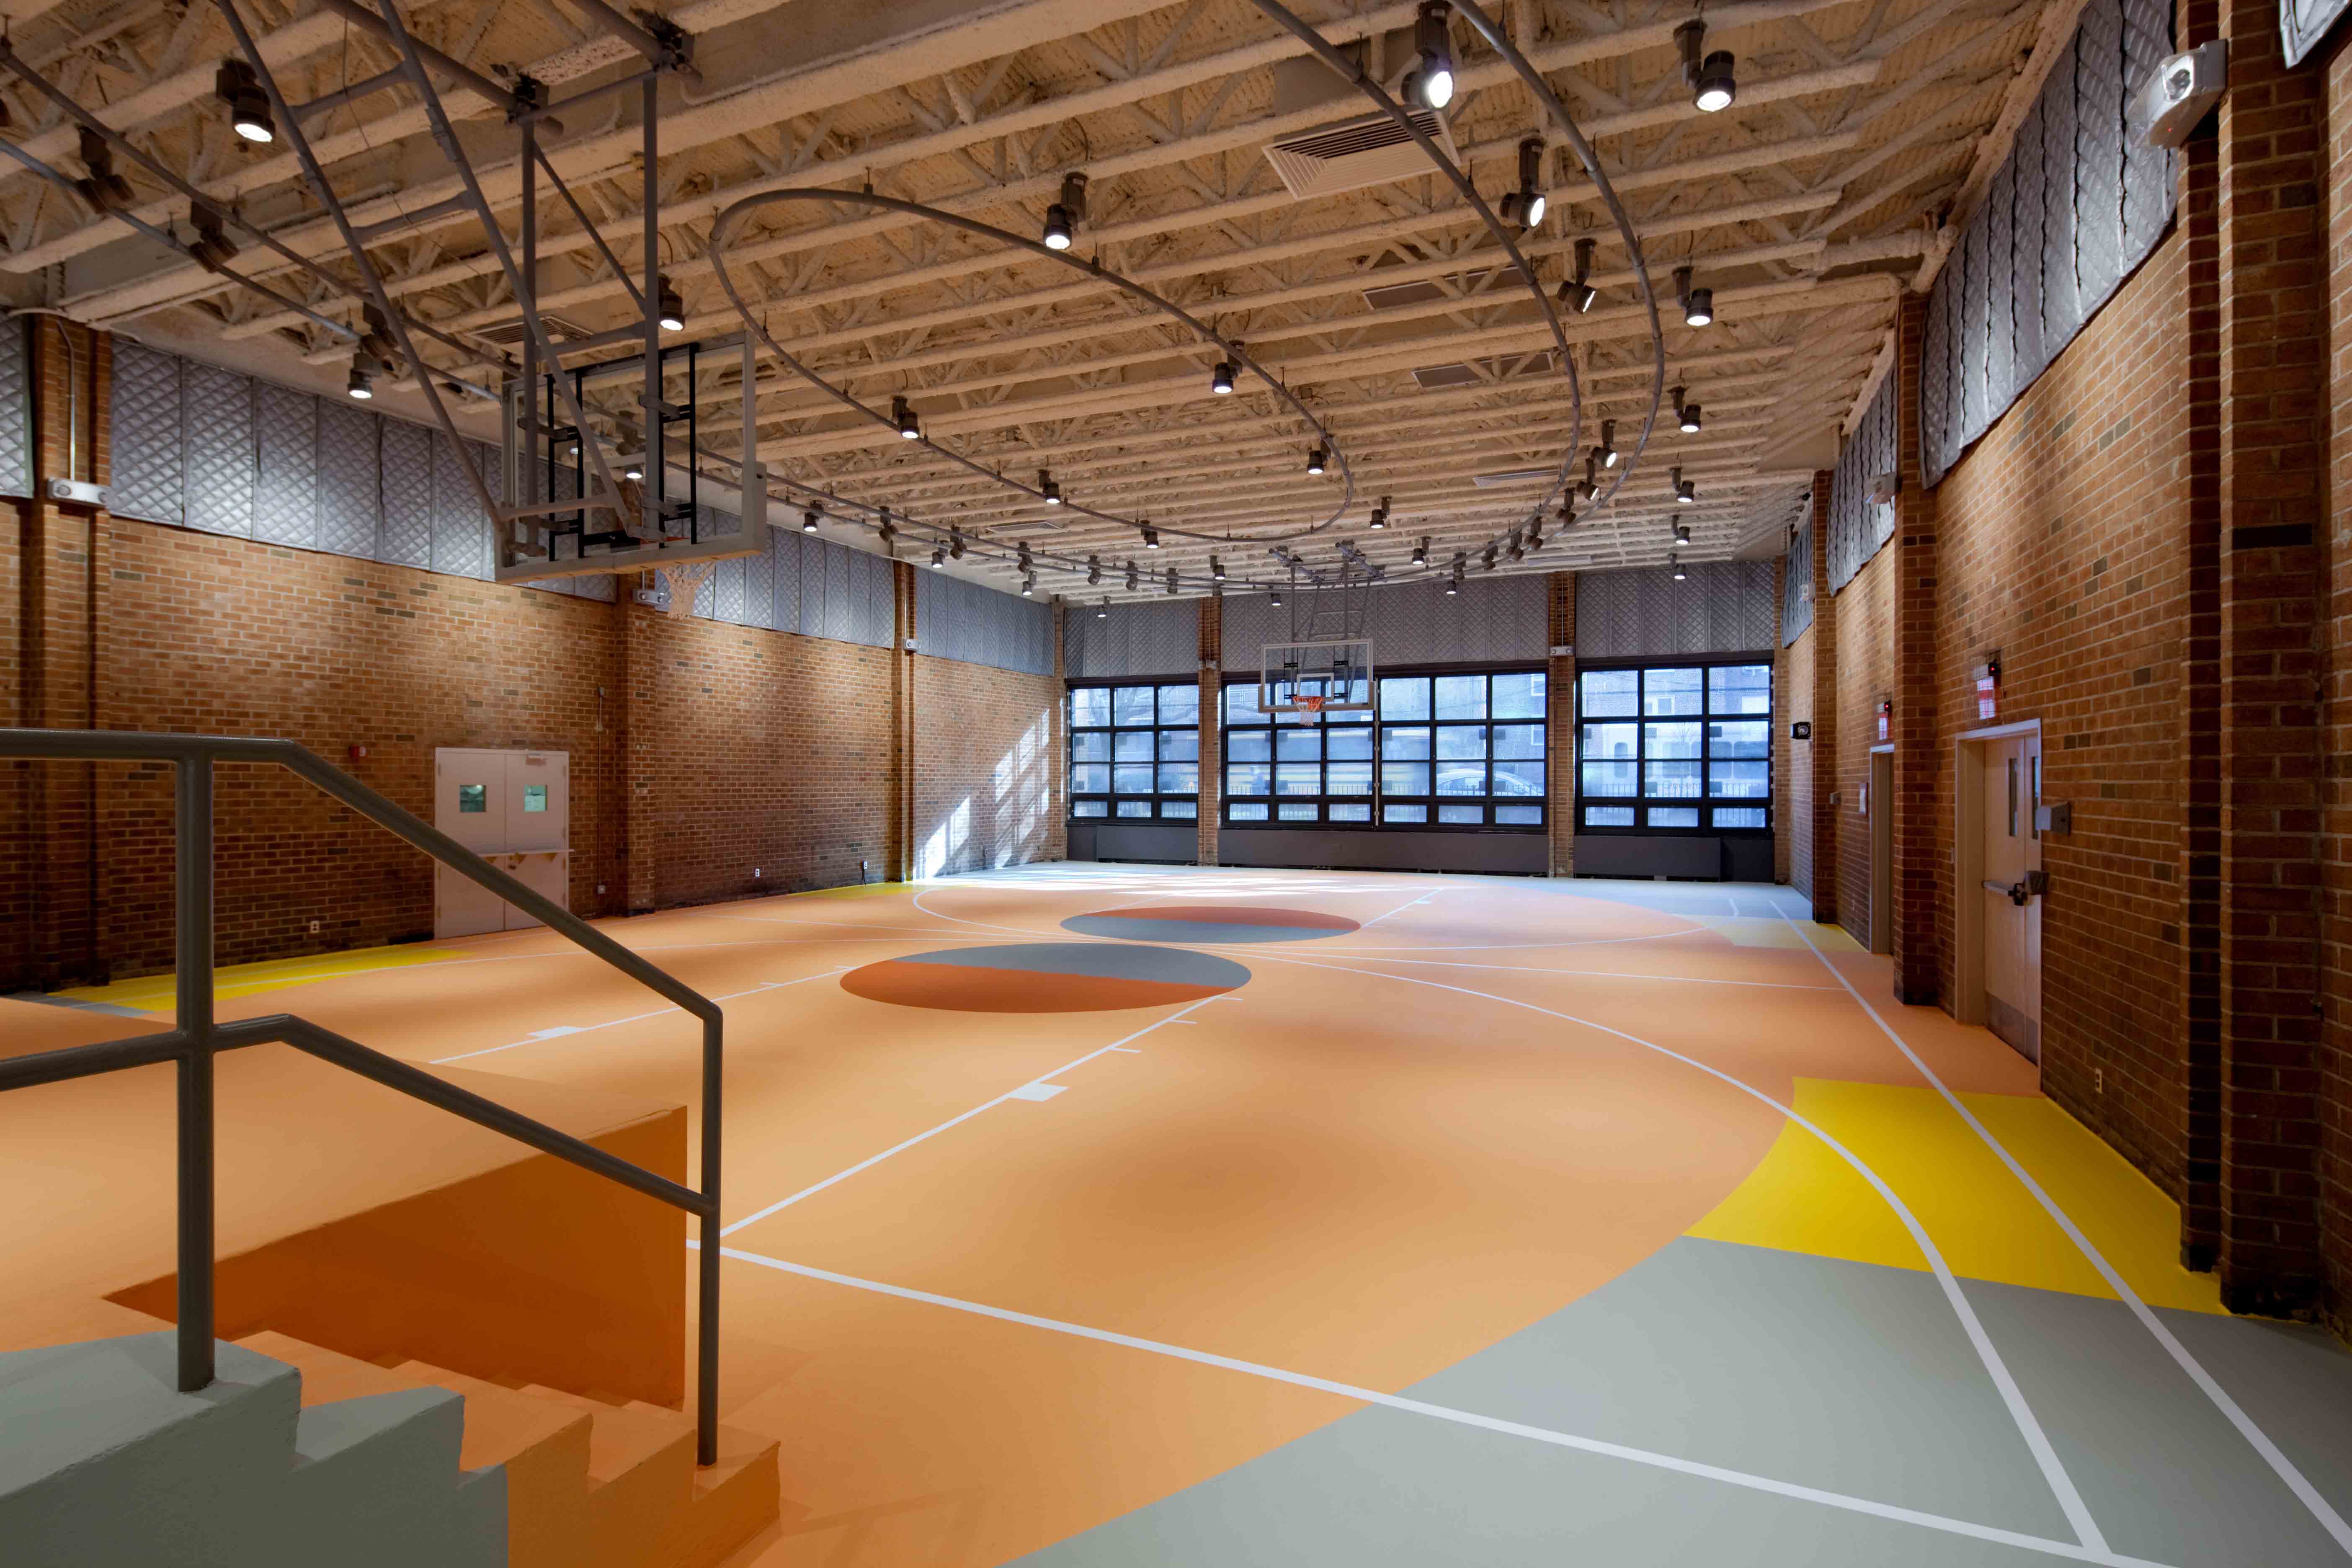 A basketball court at the Forest Hills Community House in Queens